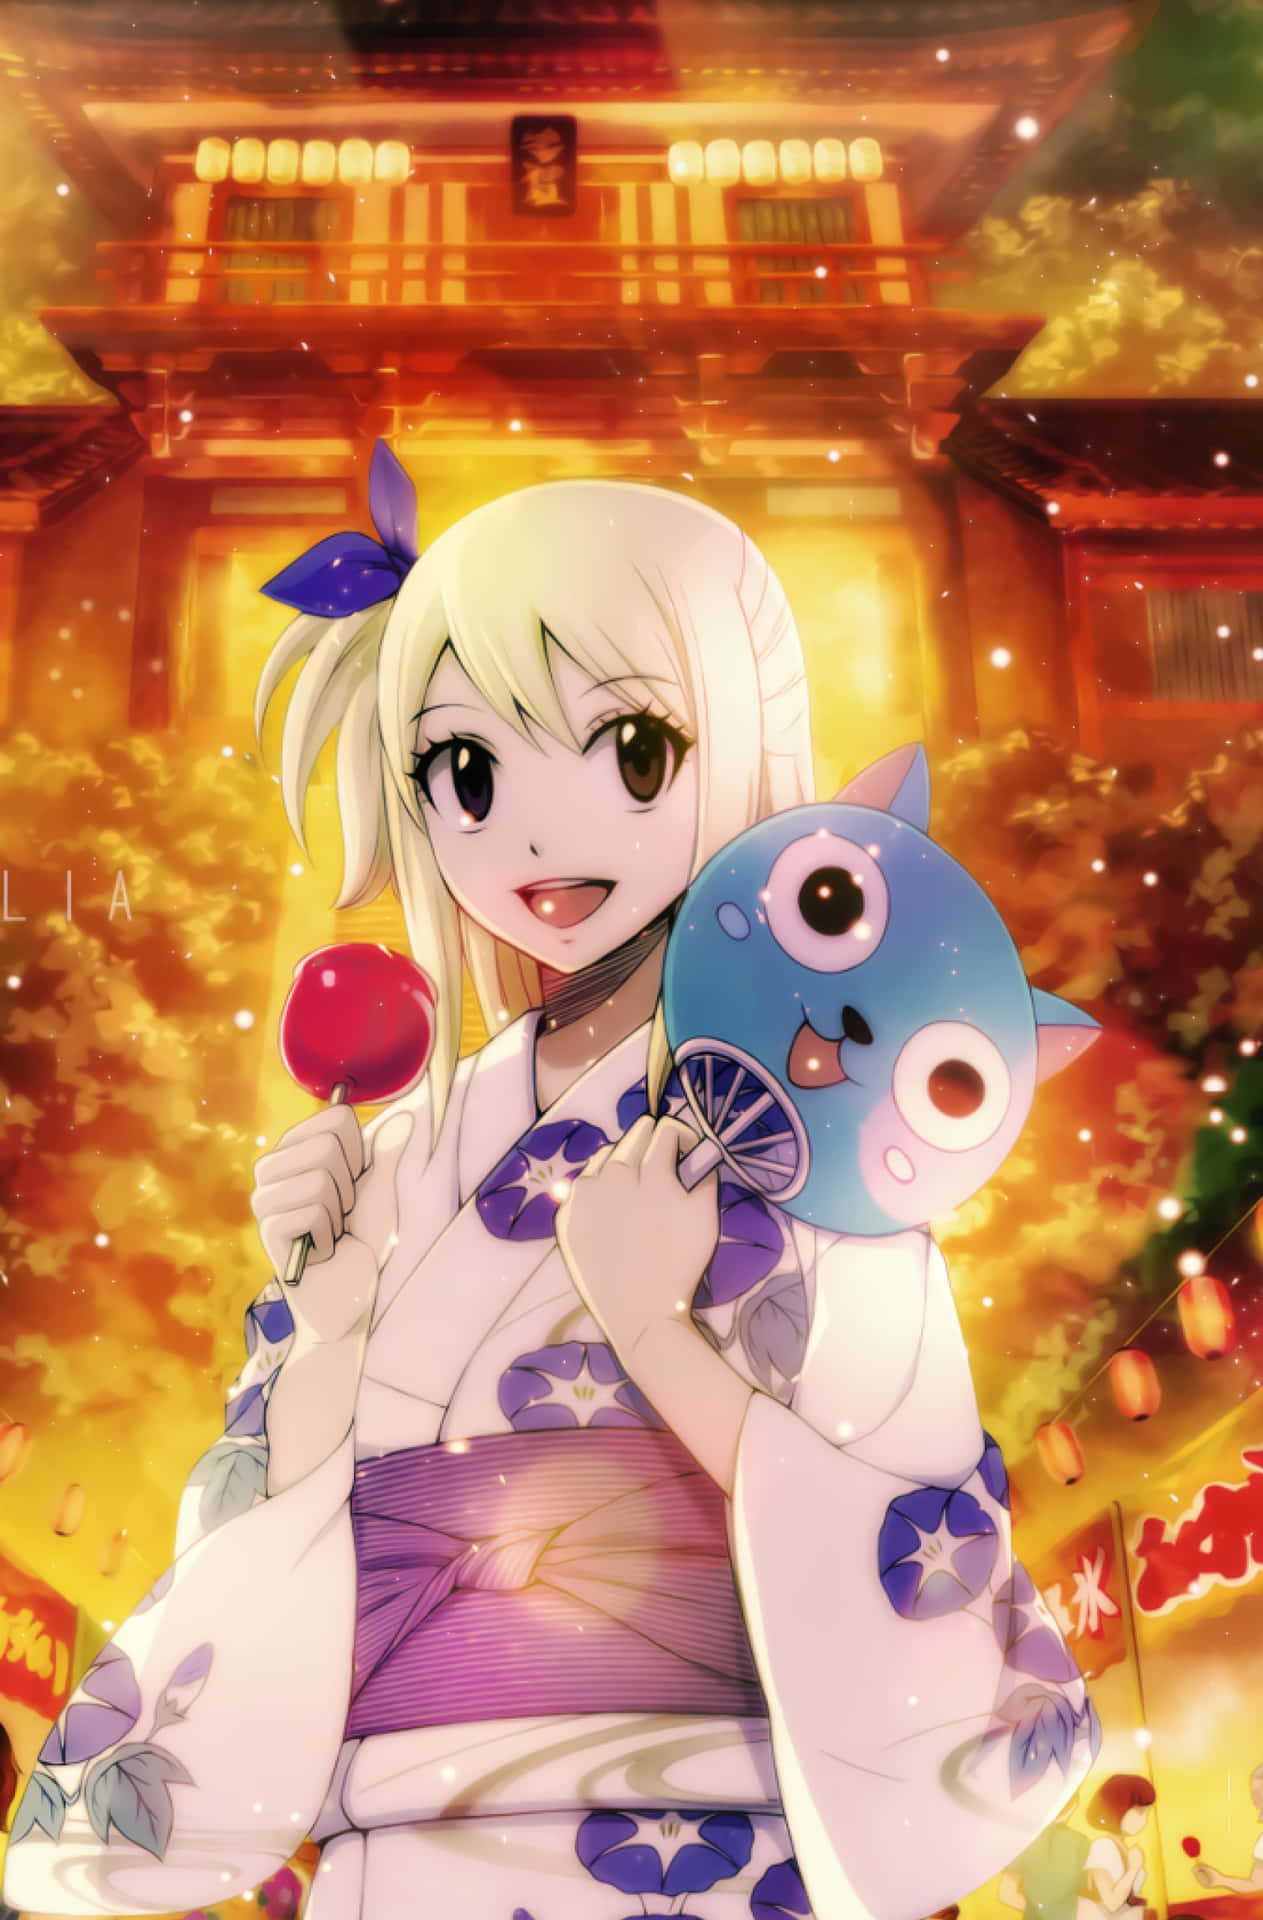 Lucy Heartfilia - A Character Defined By Bravery, Friendship, And Magic